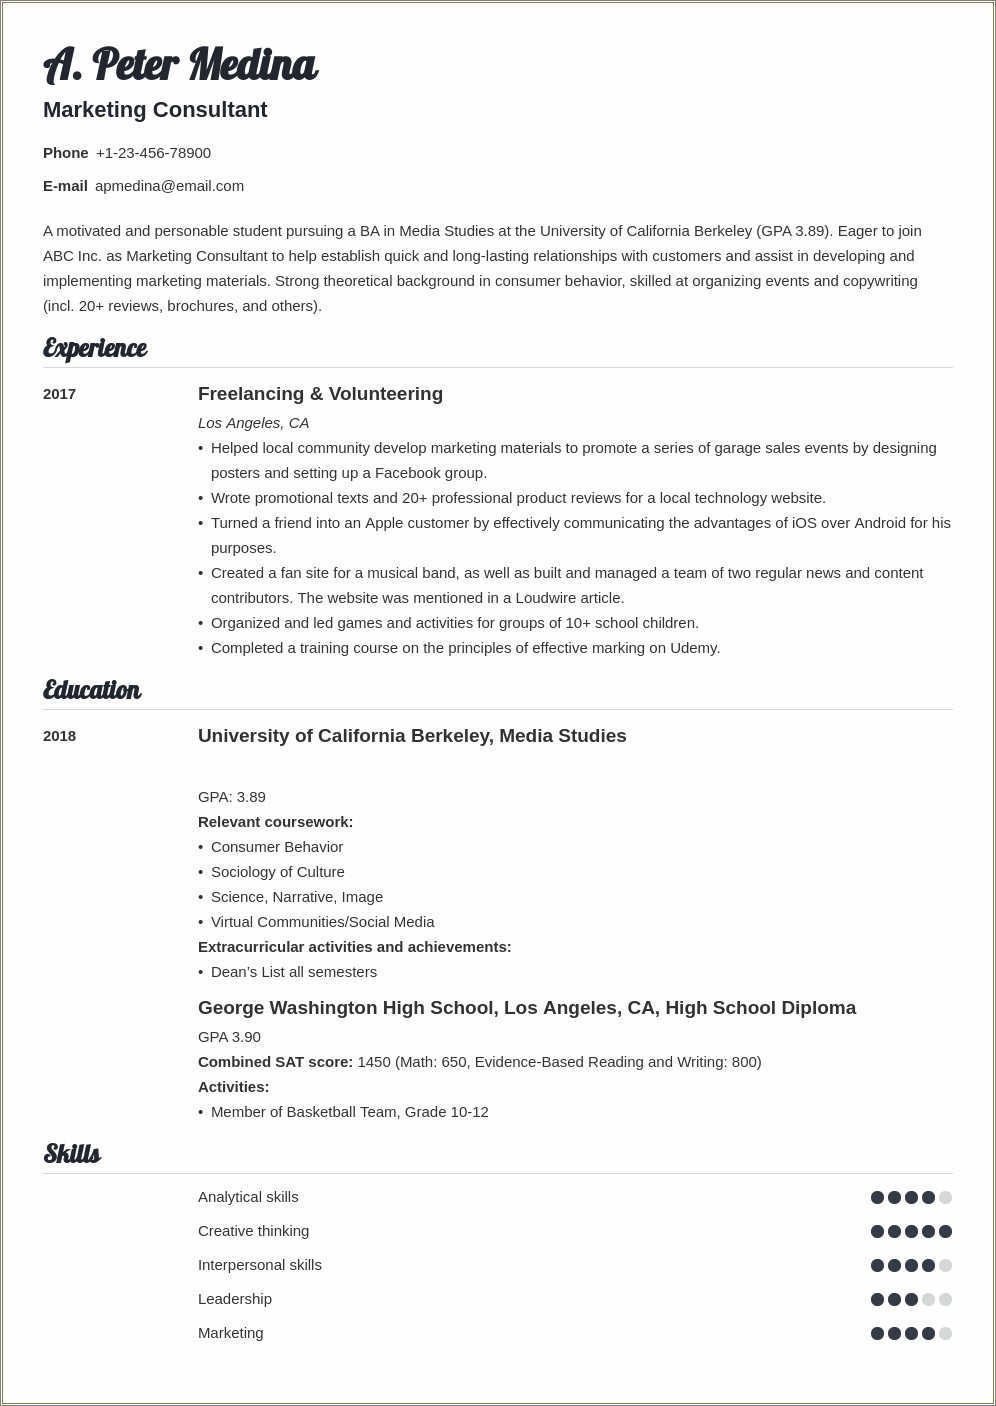 Example Of Resume And Objective With No Experience